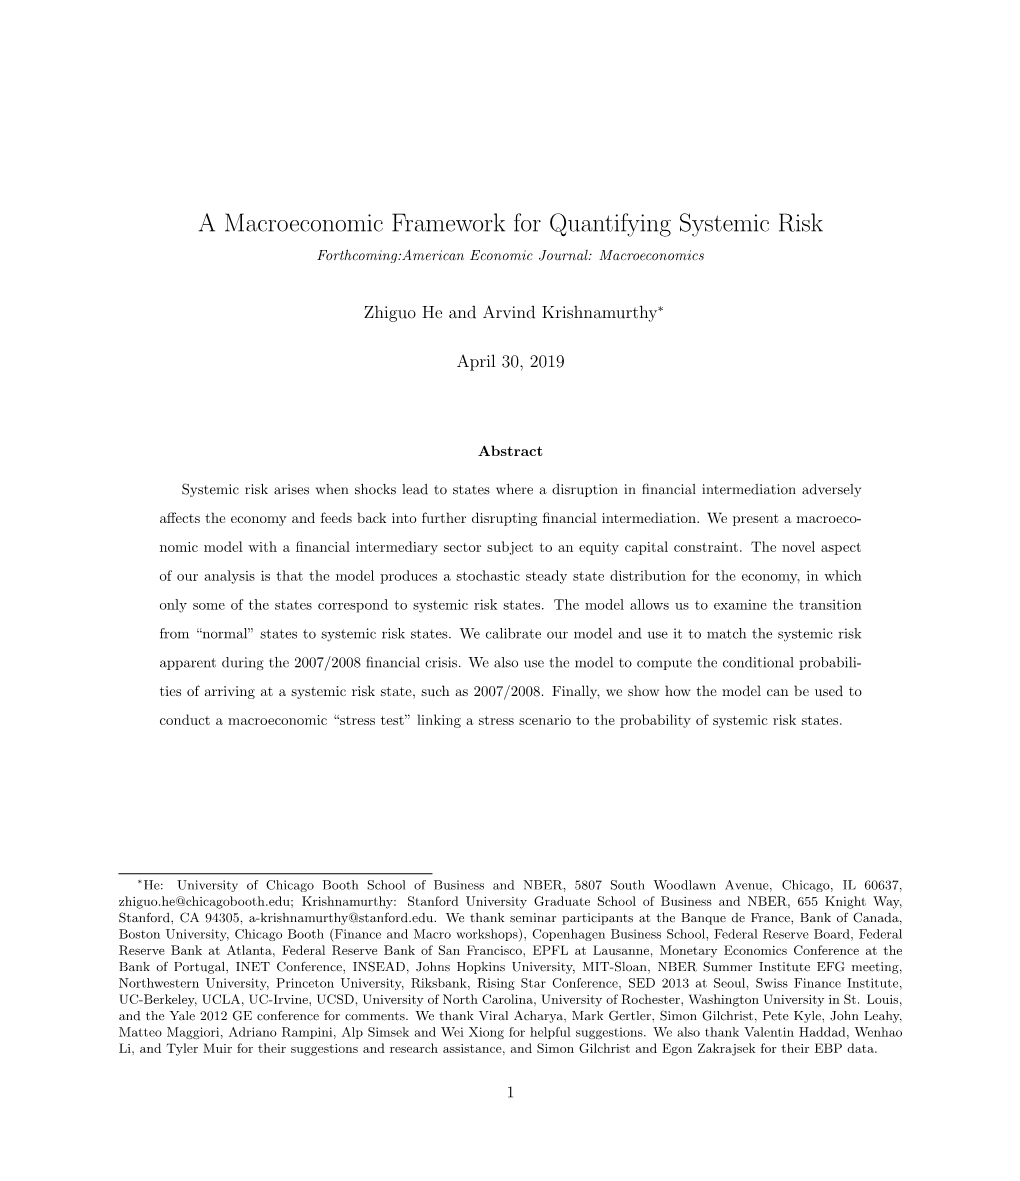 A Macroeconomic Framework for Quantifying Systemic Risk Forthcoming:American Economic Journal: Macroeconomics